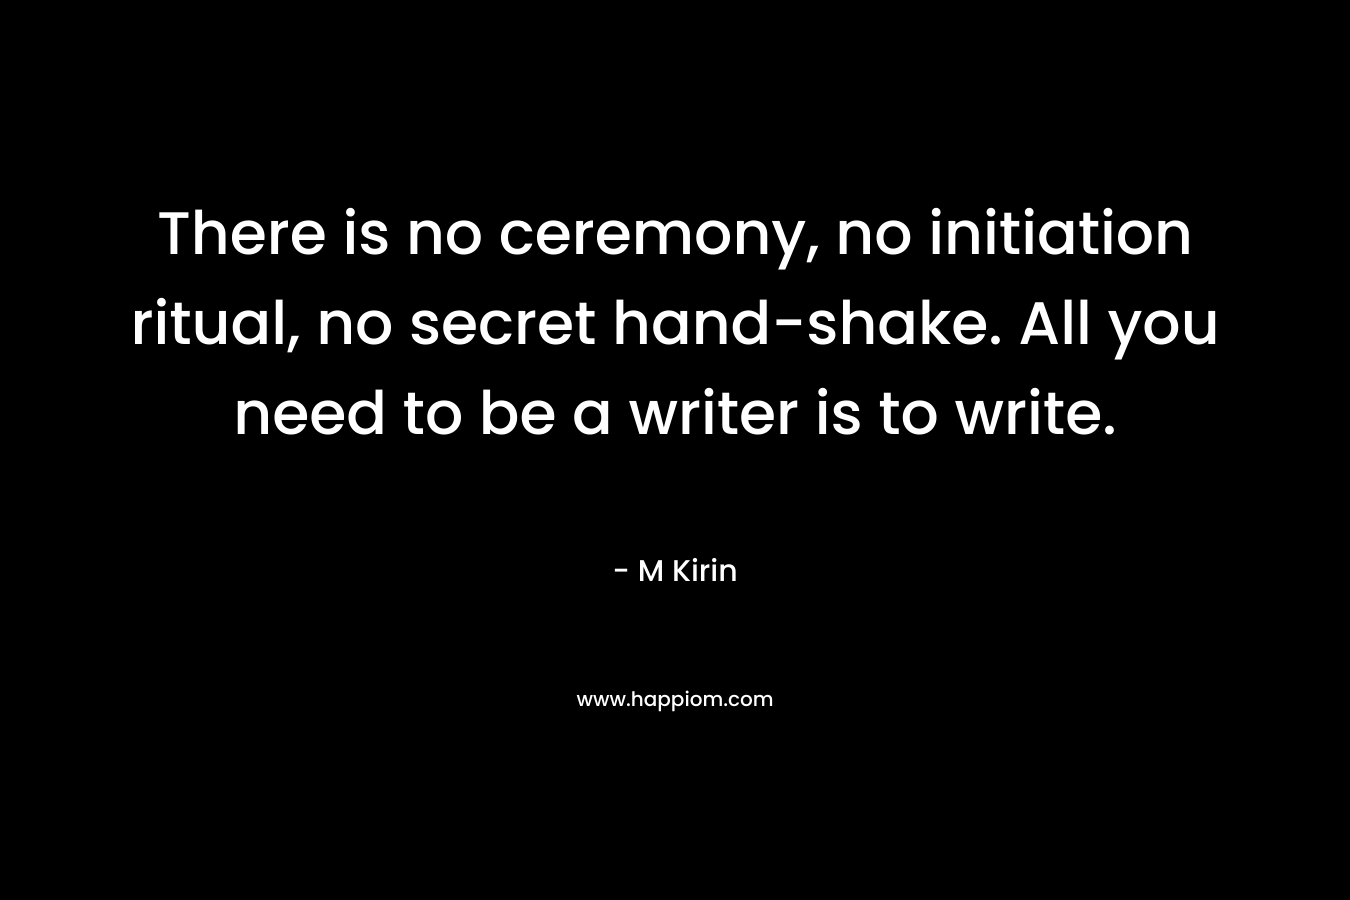 There is no ceremony, no initiation ritual, no secret hand-shake. All you need to be a writer is to write. – M Kirin